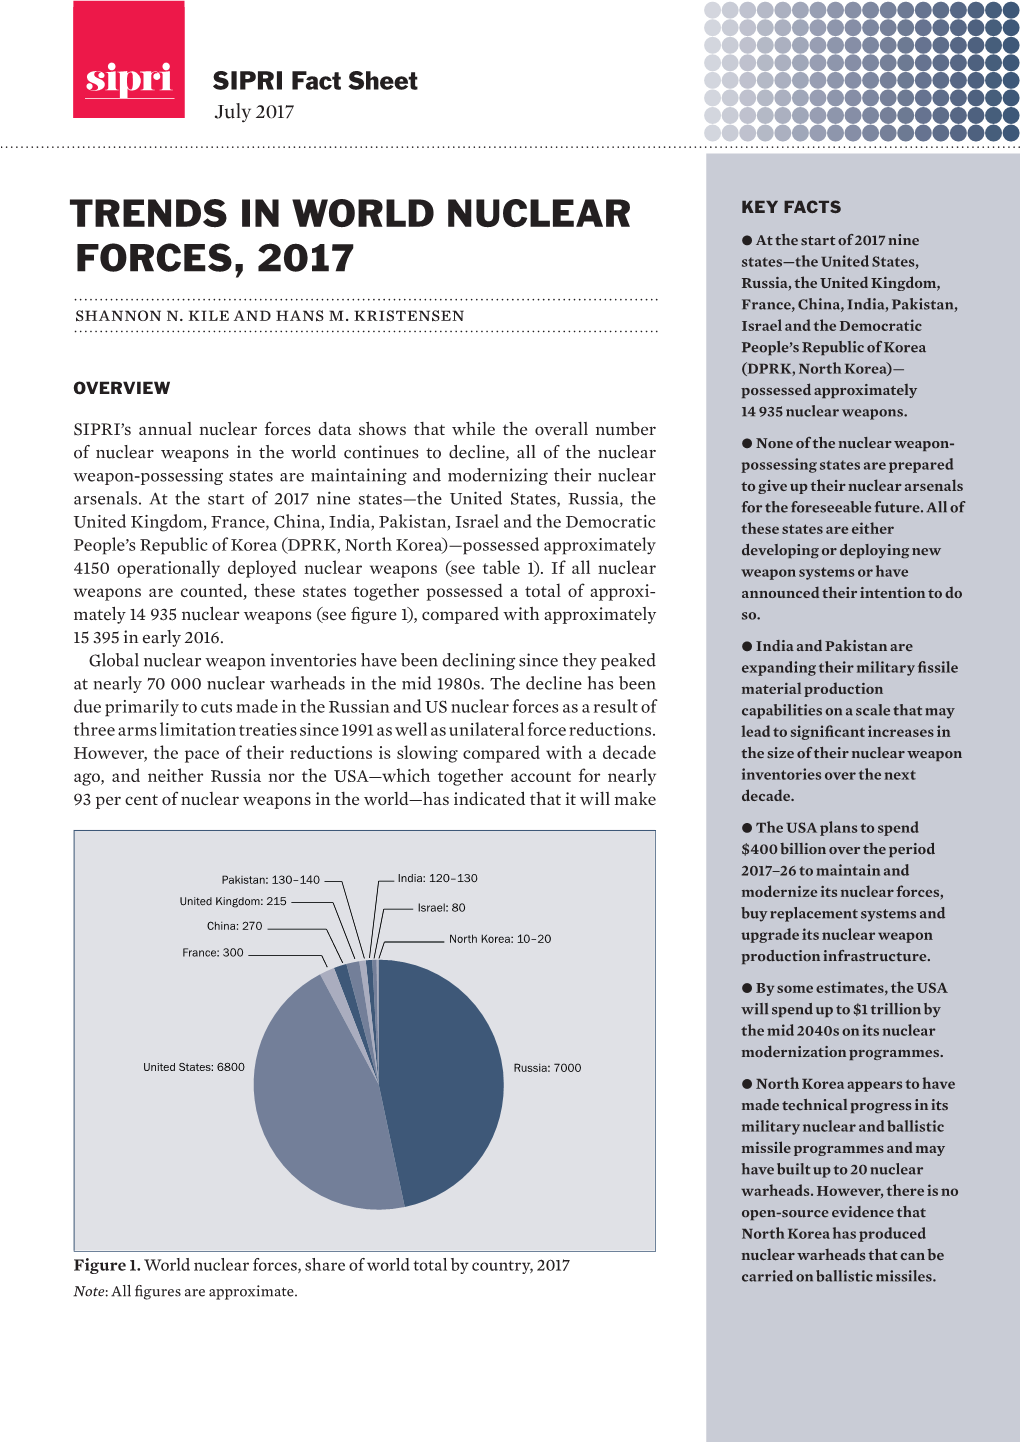 Trends in World Nuclear Forces, 2017 3